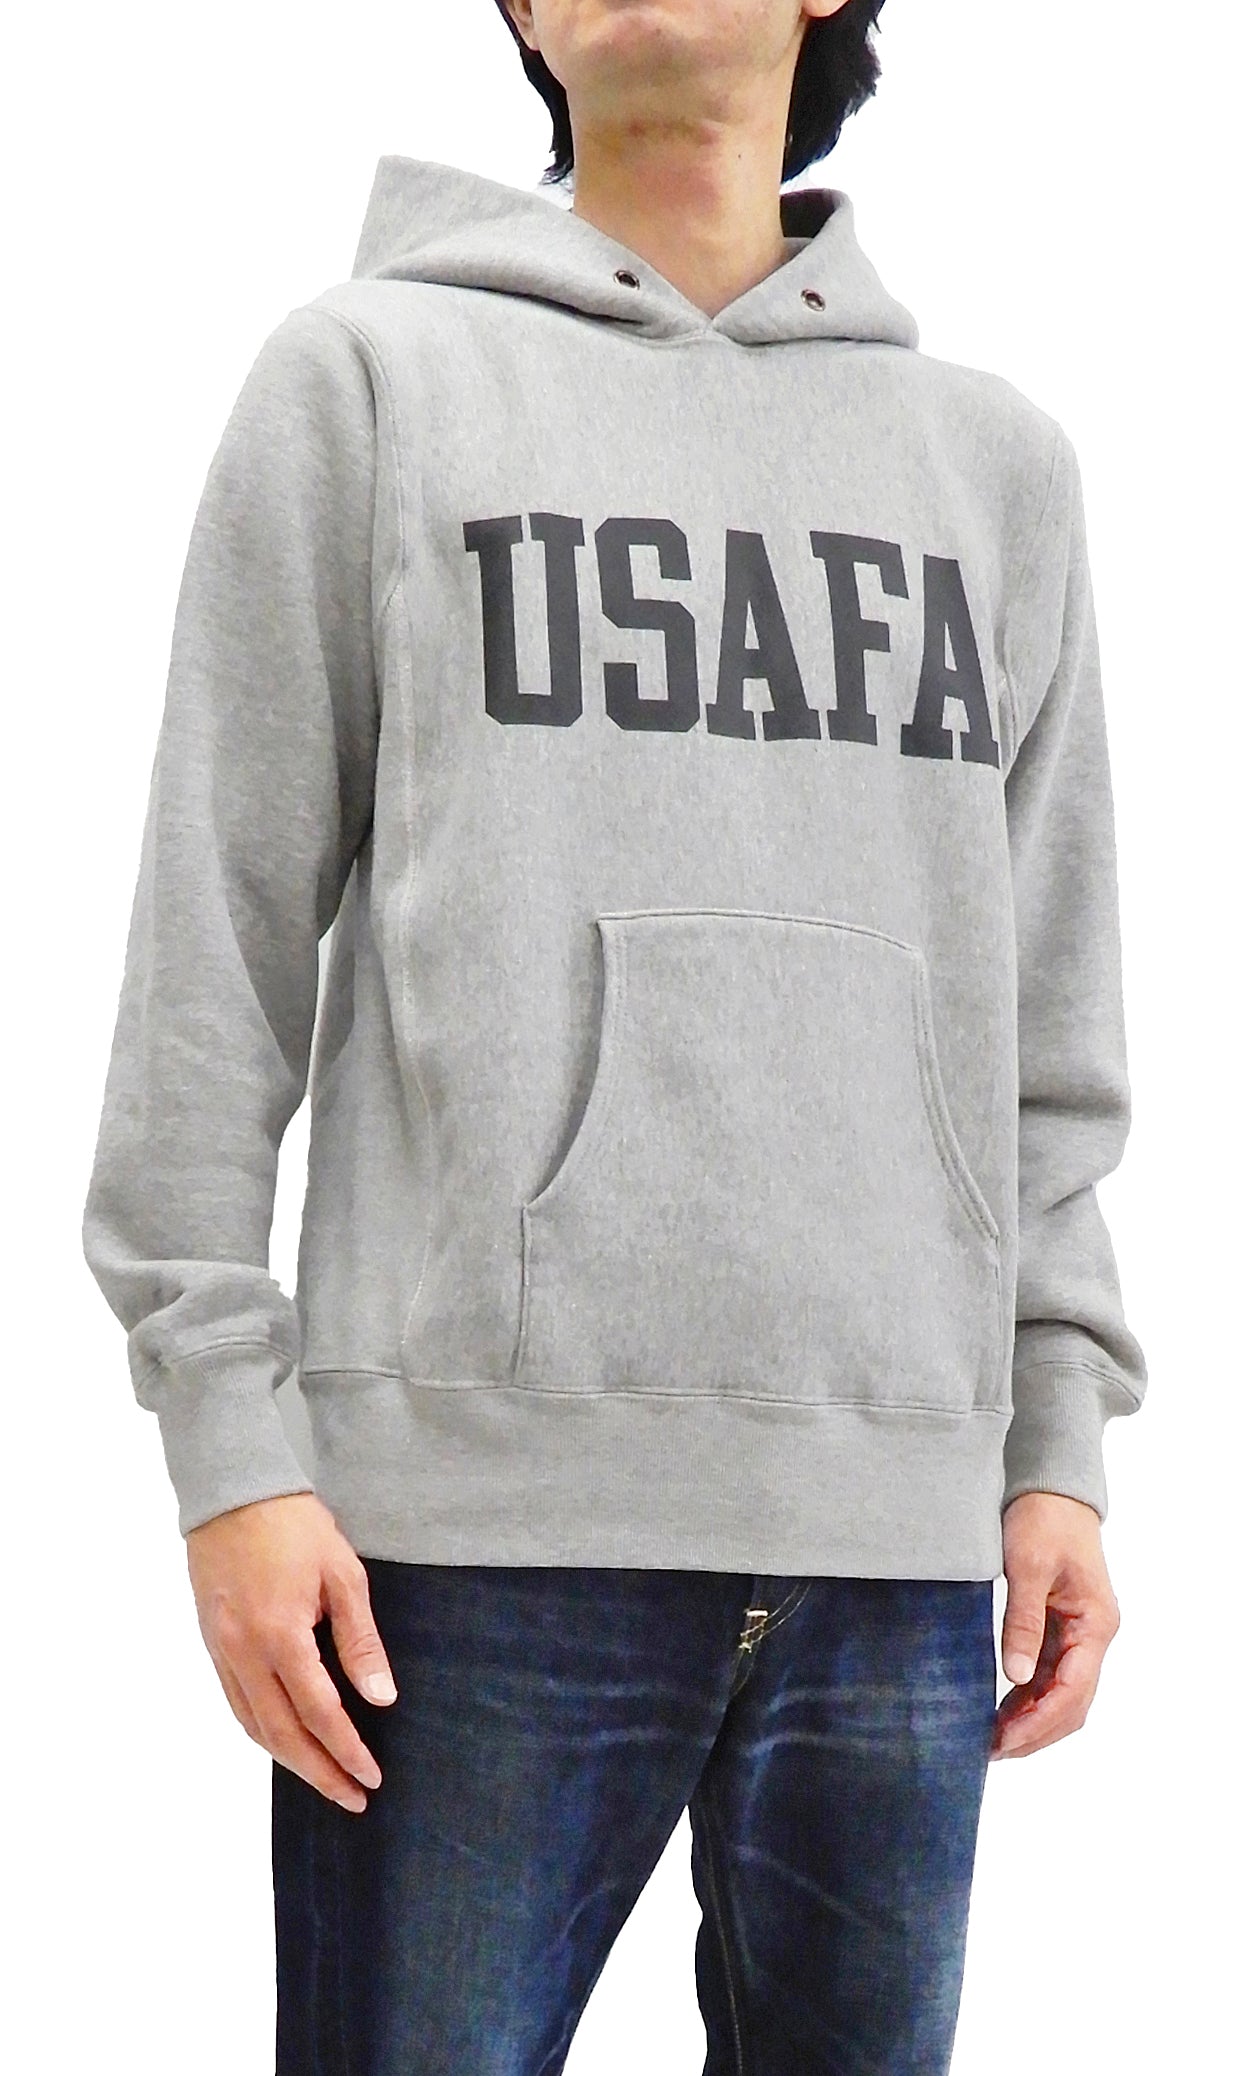 Buzz Rickson Pullover Hoodie Men's Reproduction of U.S. Air Force Academy  Hooded Sweatshirt BR Heather Gray